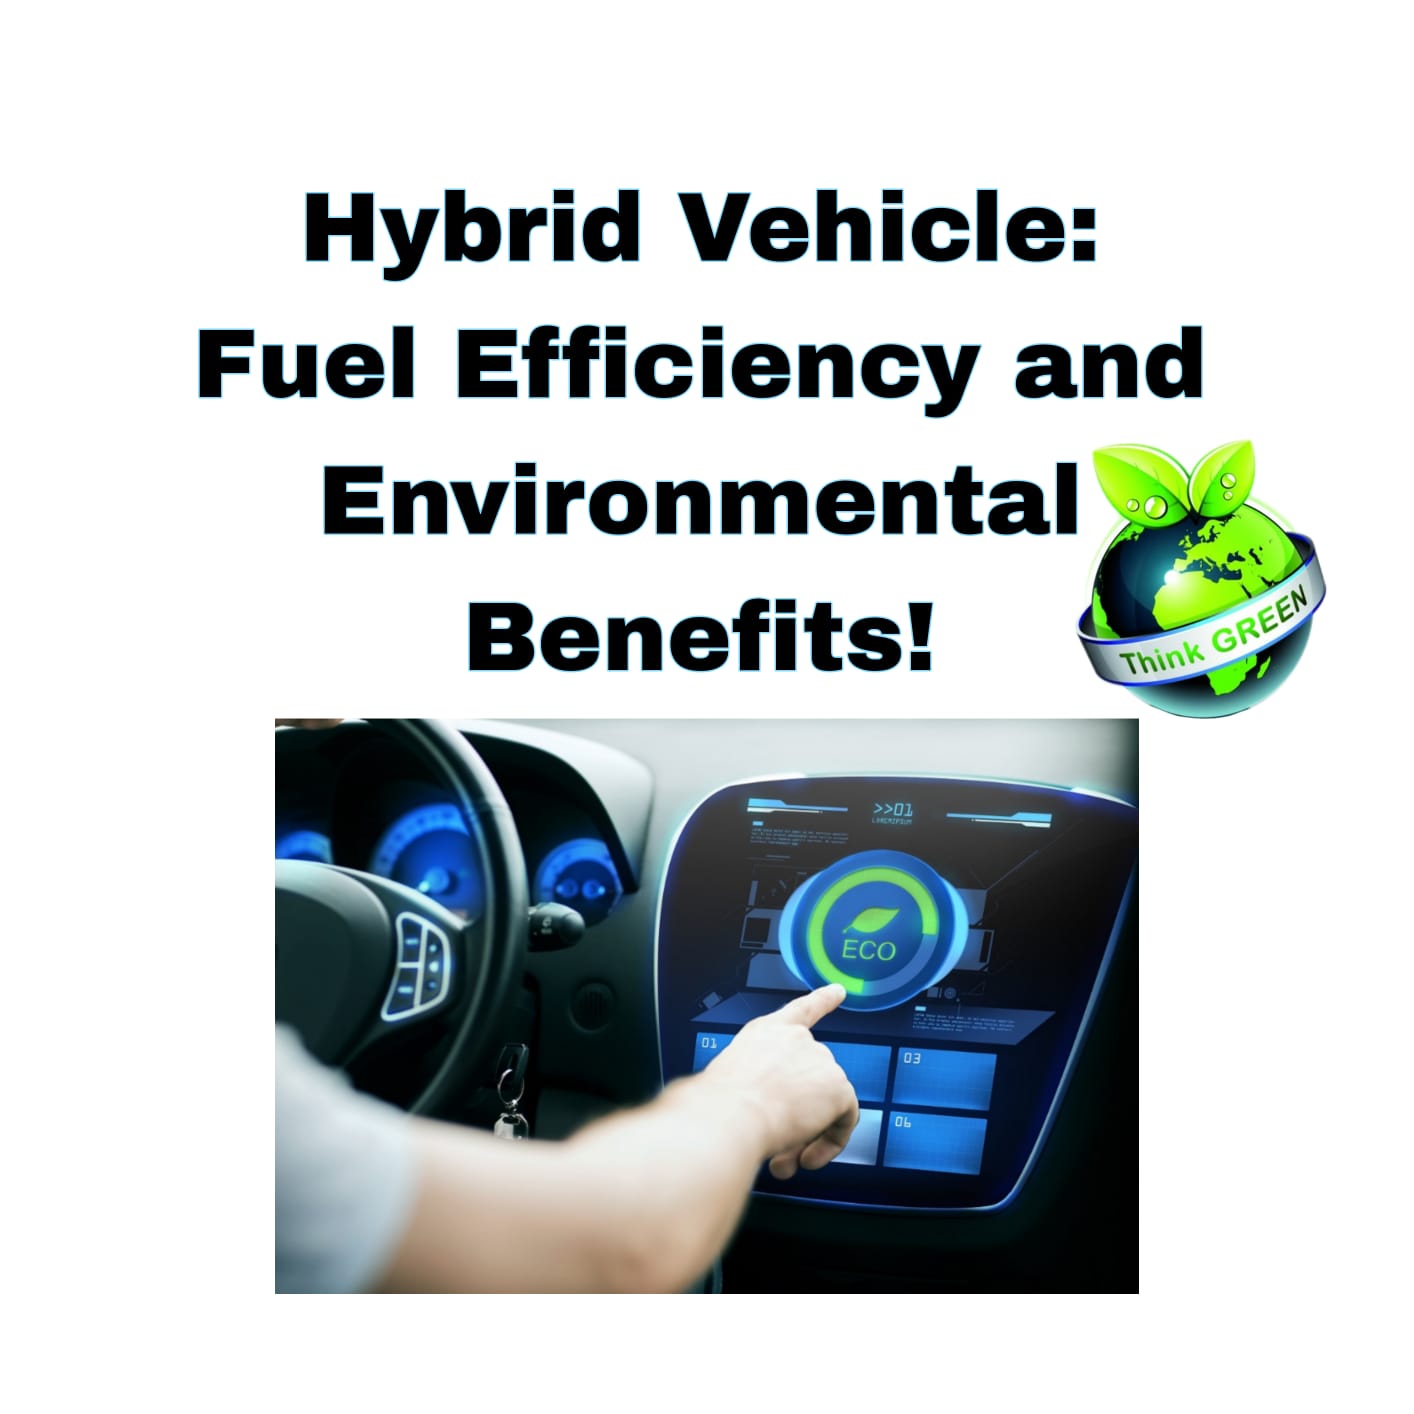 Hybrid Vehicle: Fuel Efficiency and Environmental Benefits!